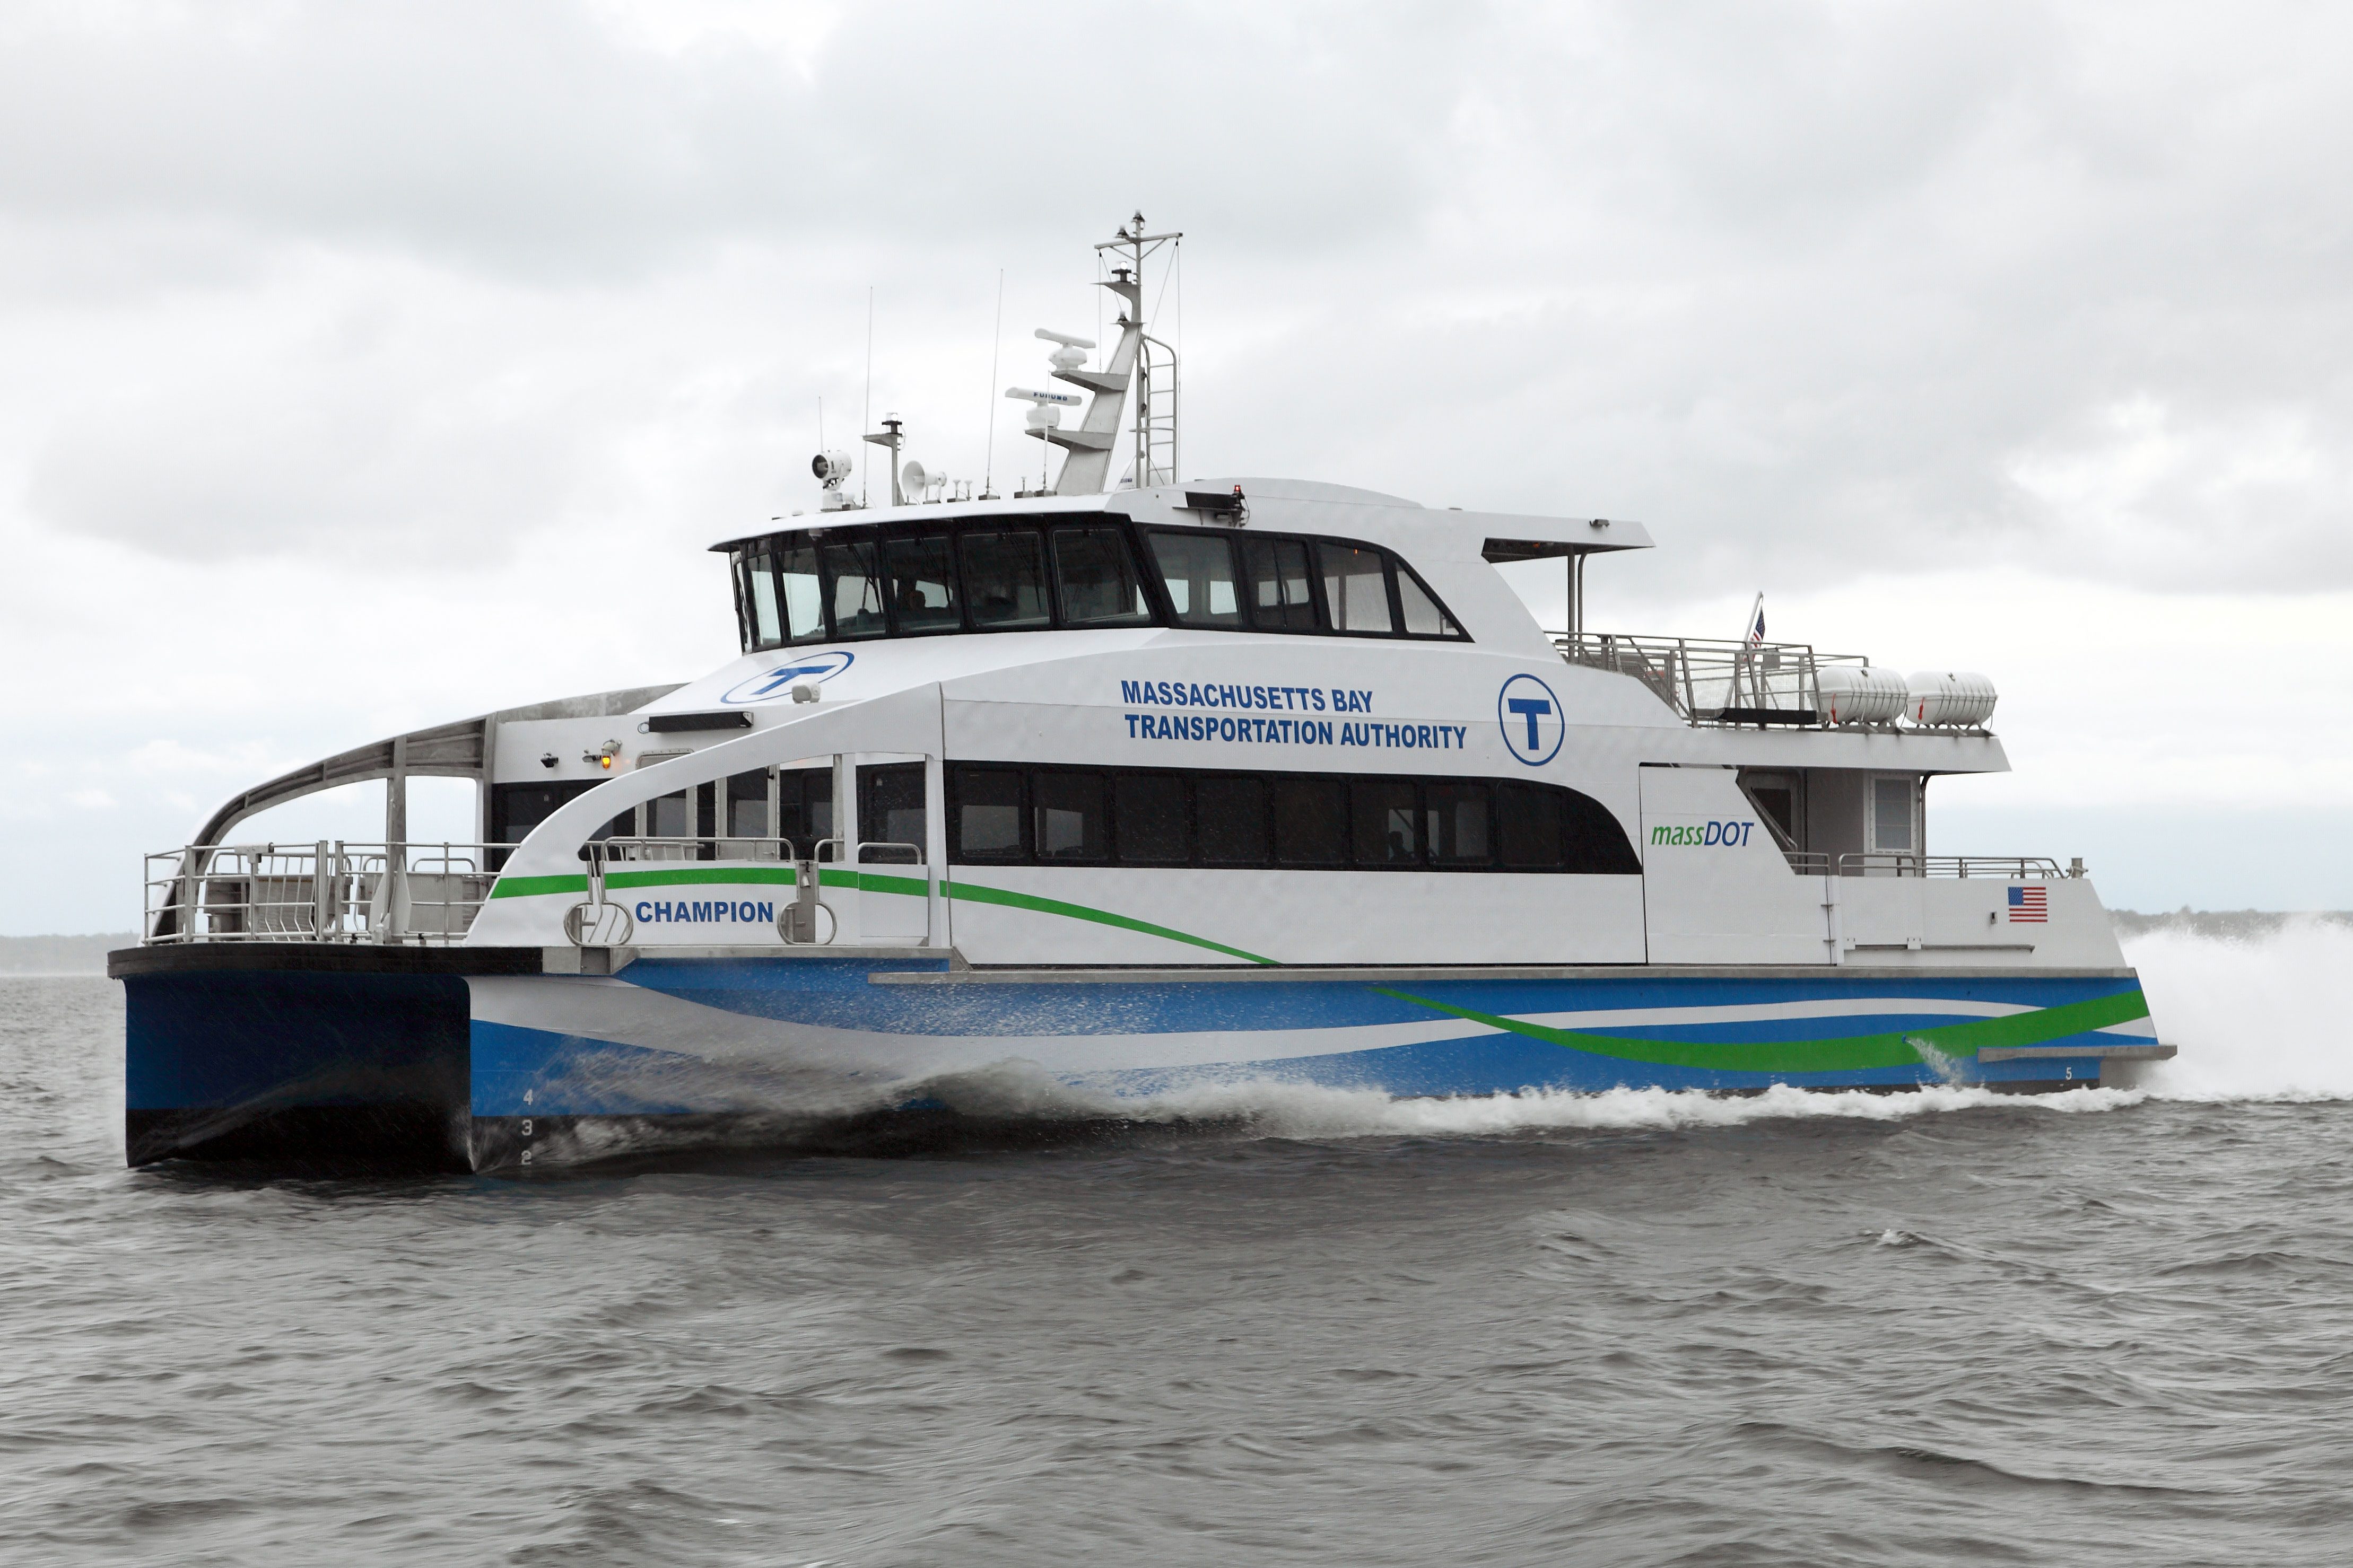 Incat Crowther’s Five-Hundredth Vessel Launched